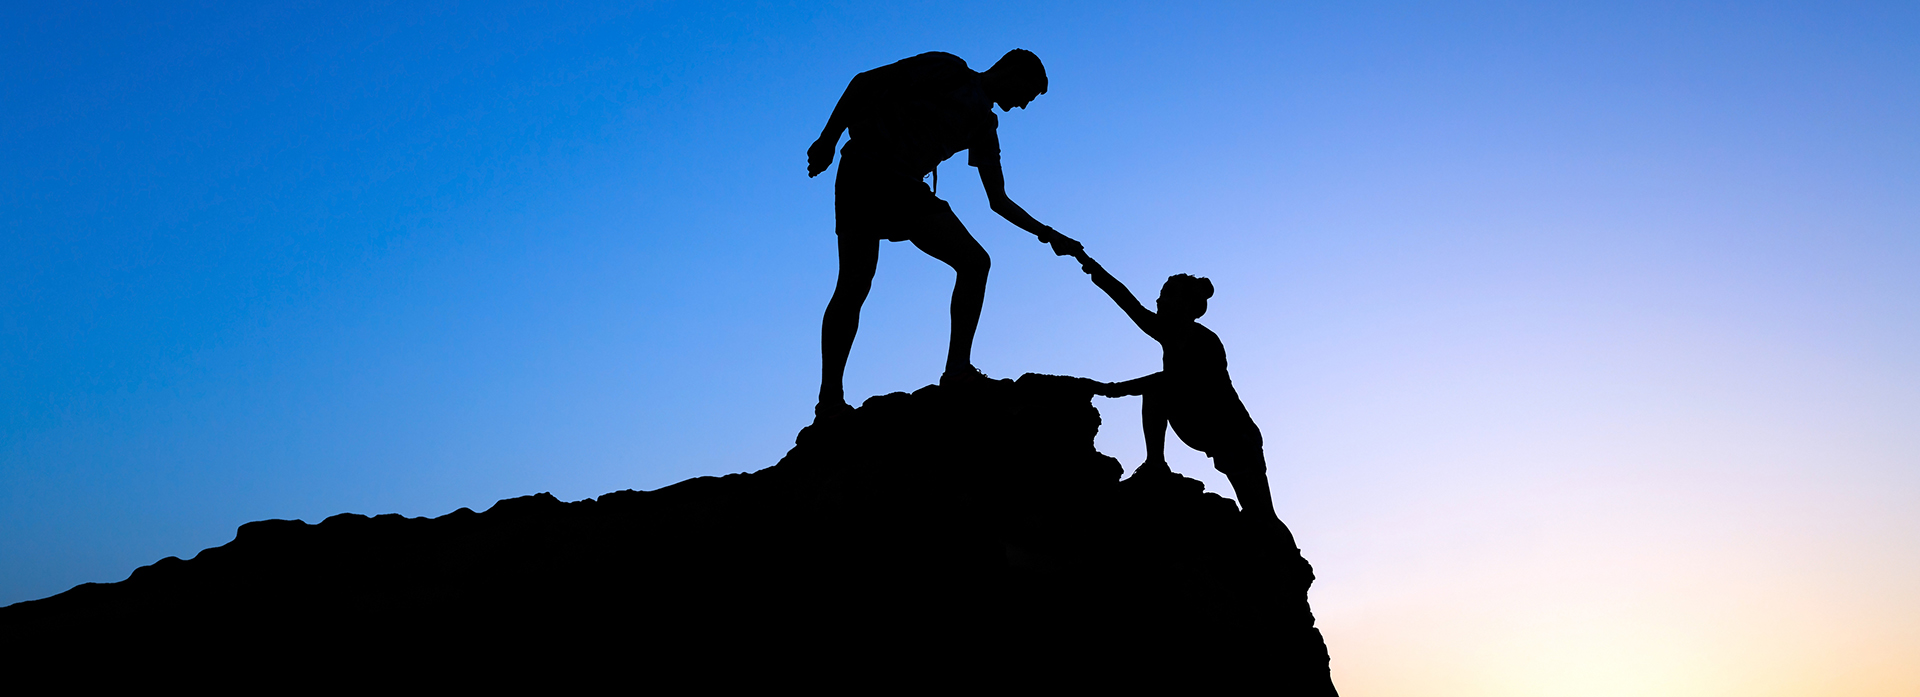 Image of a person on a mountain pulling up another person up 